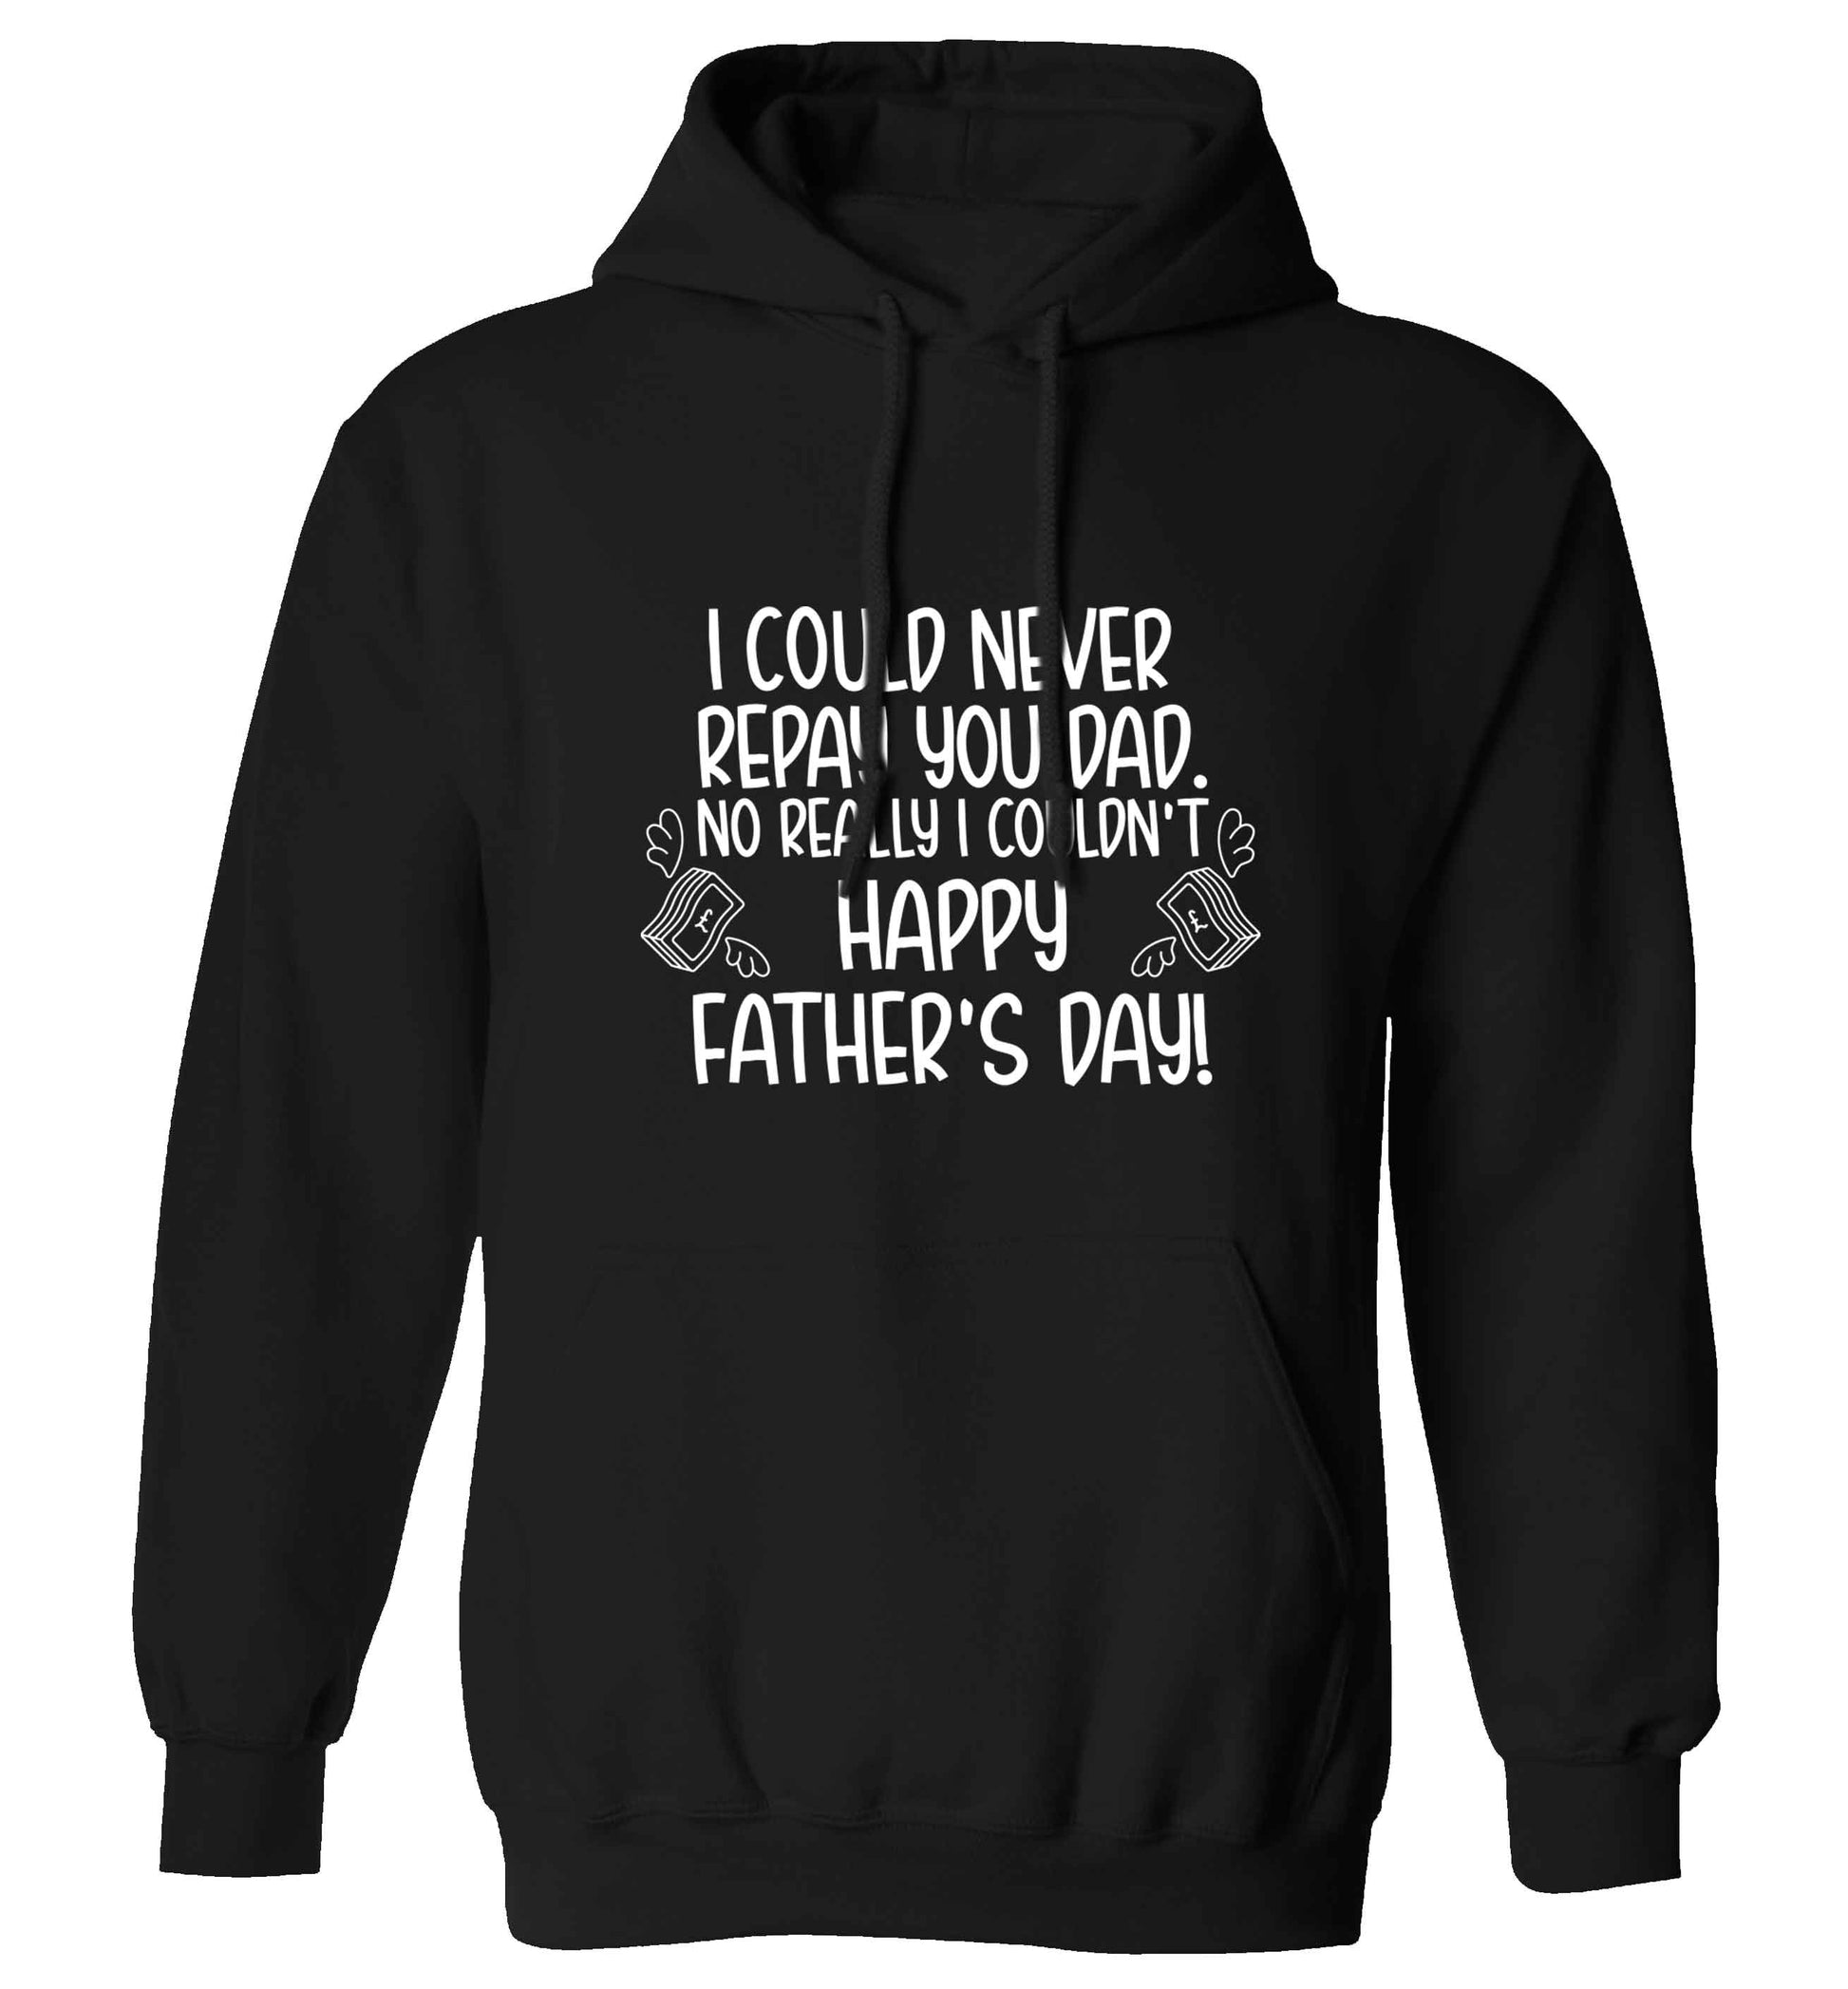 I could never repay you dad. No I really couldn't happy Father's day! adults unisex black hoodie 2XL